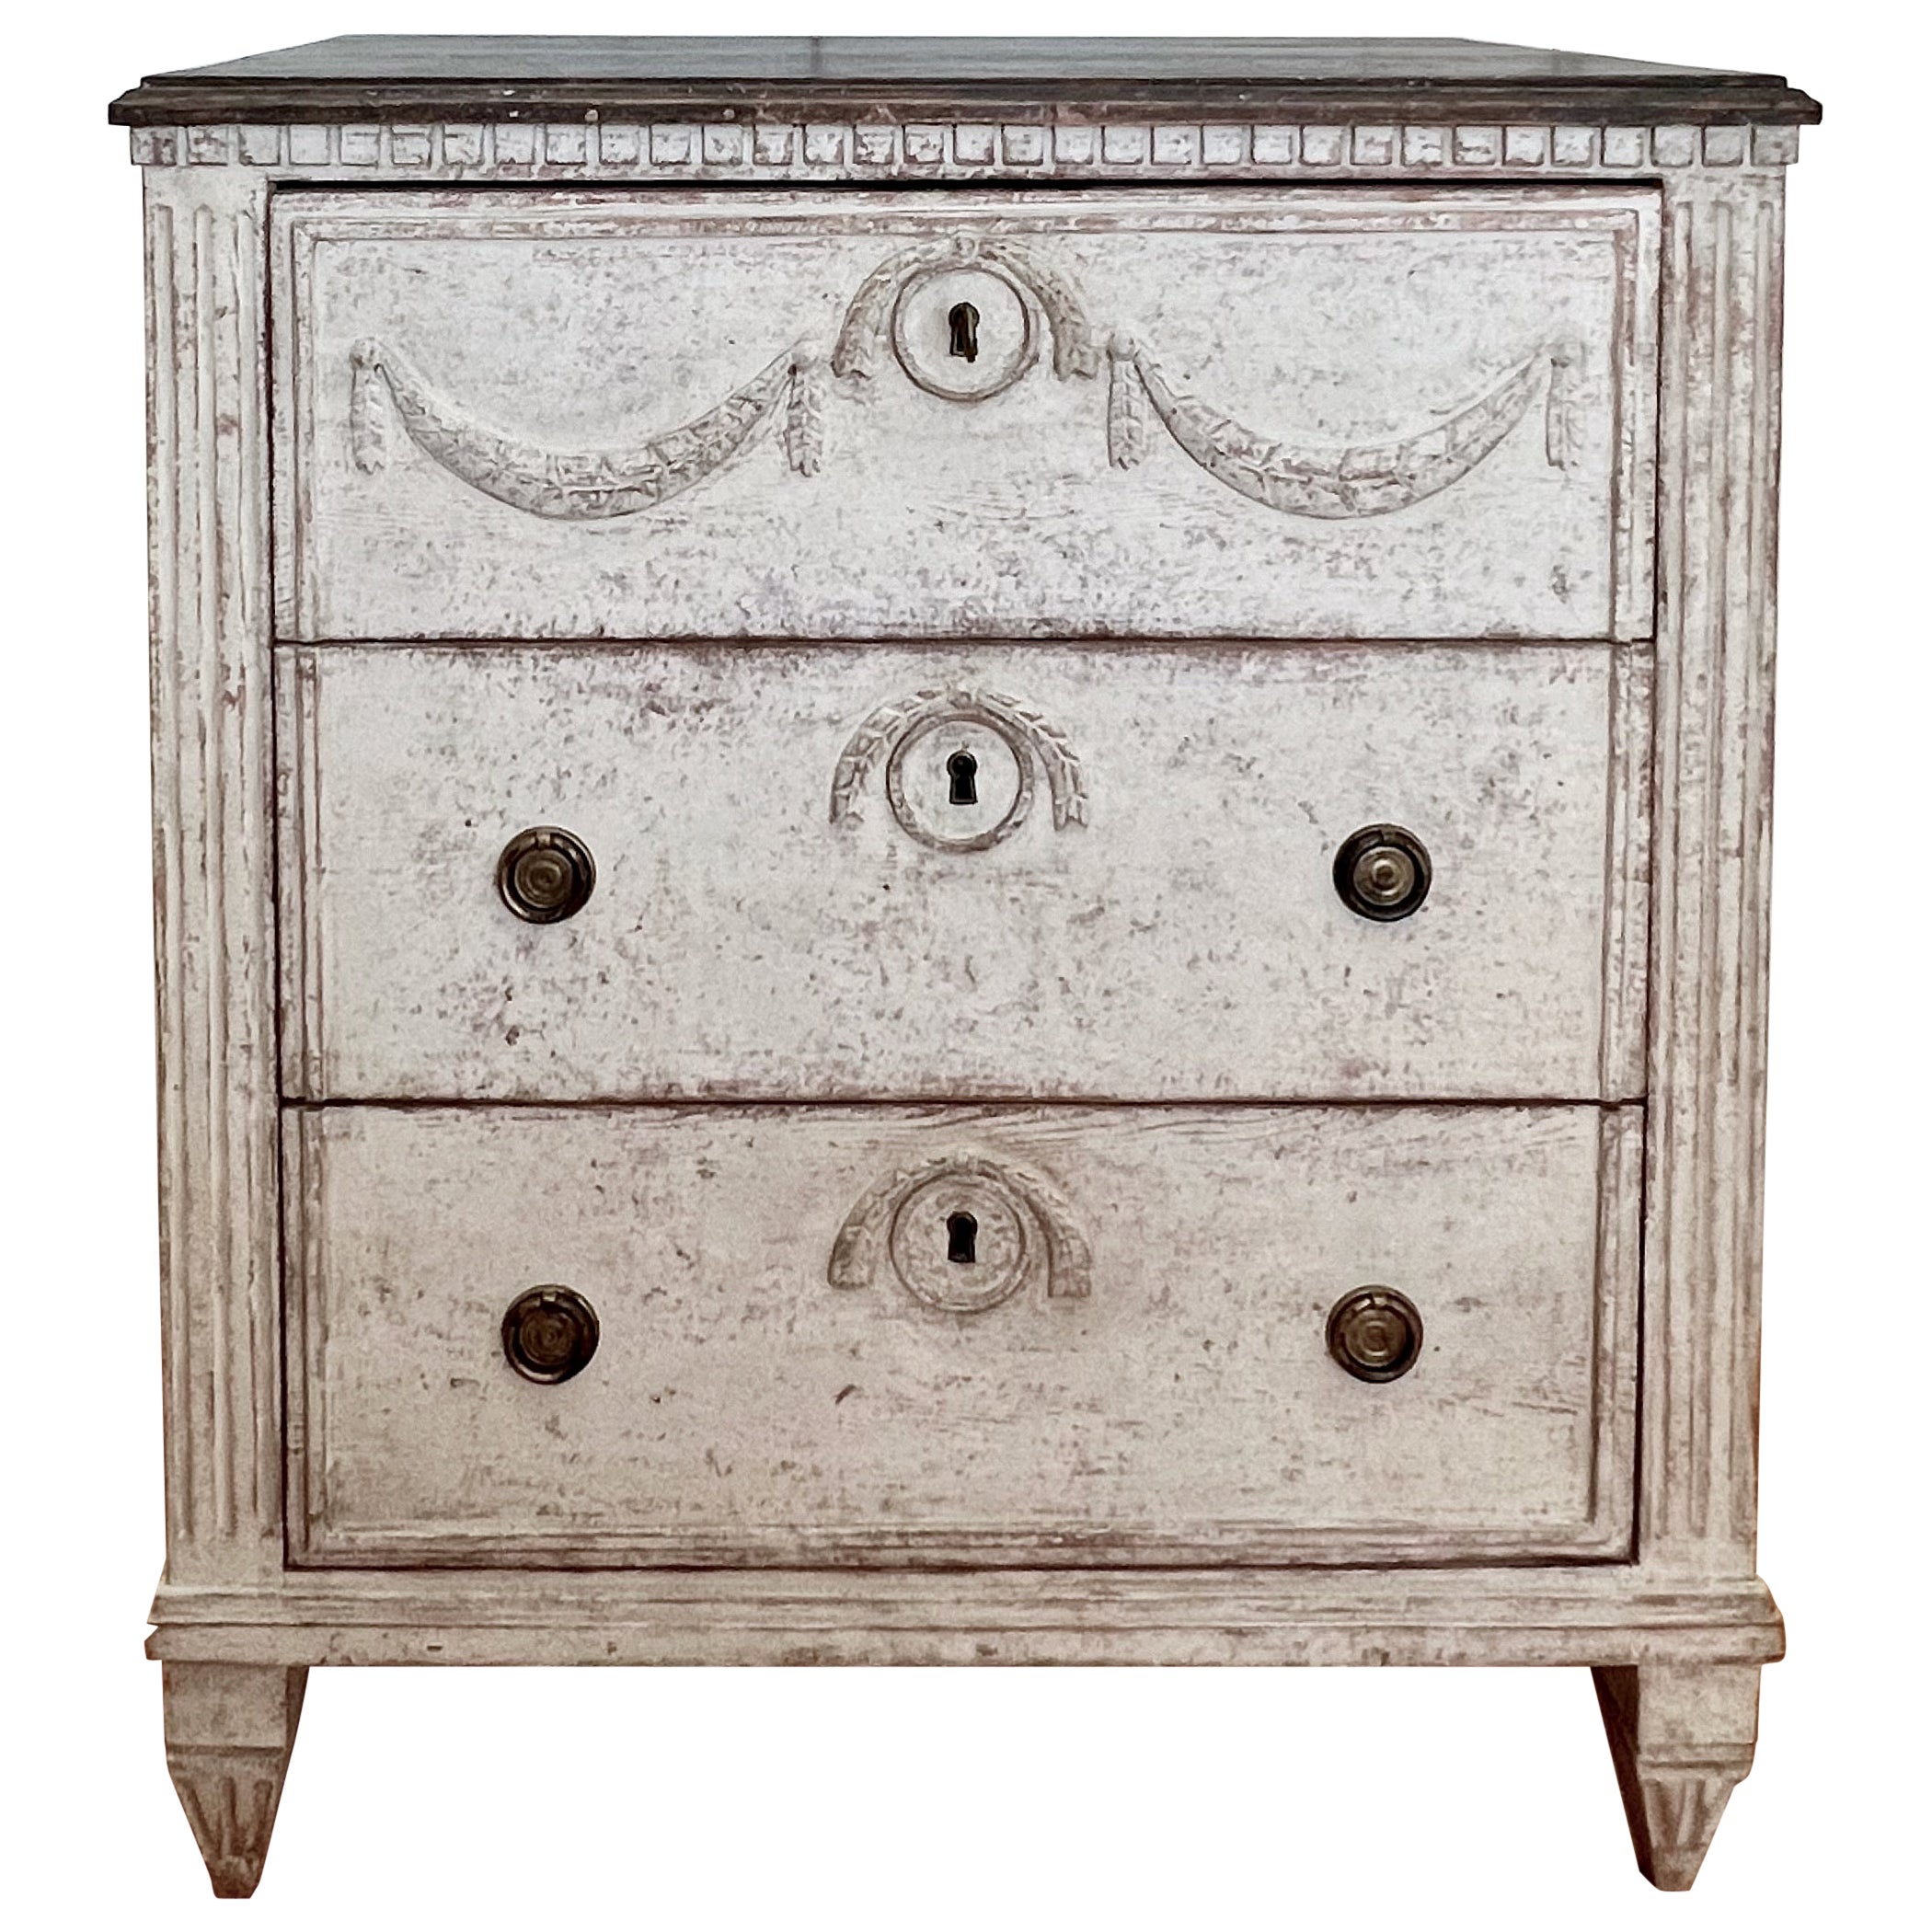 19th century Small Swedish Chest For Sale